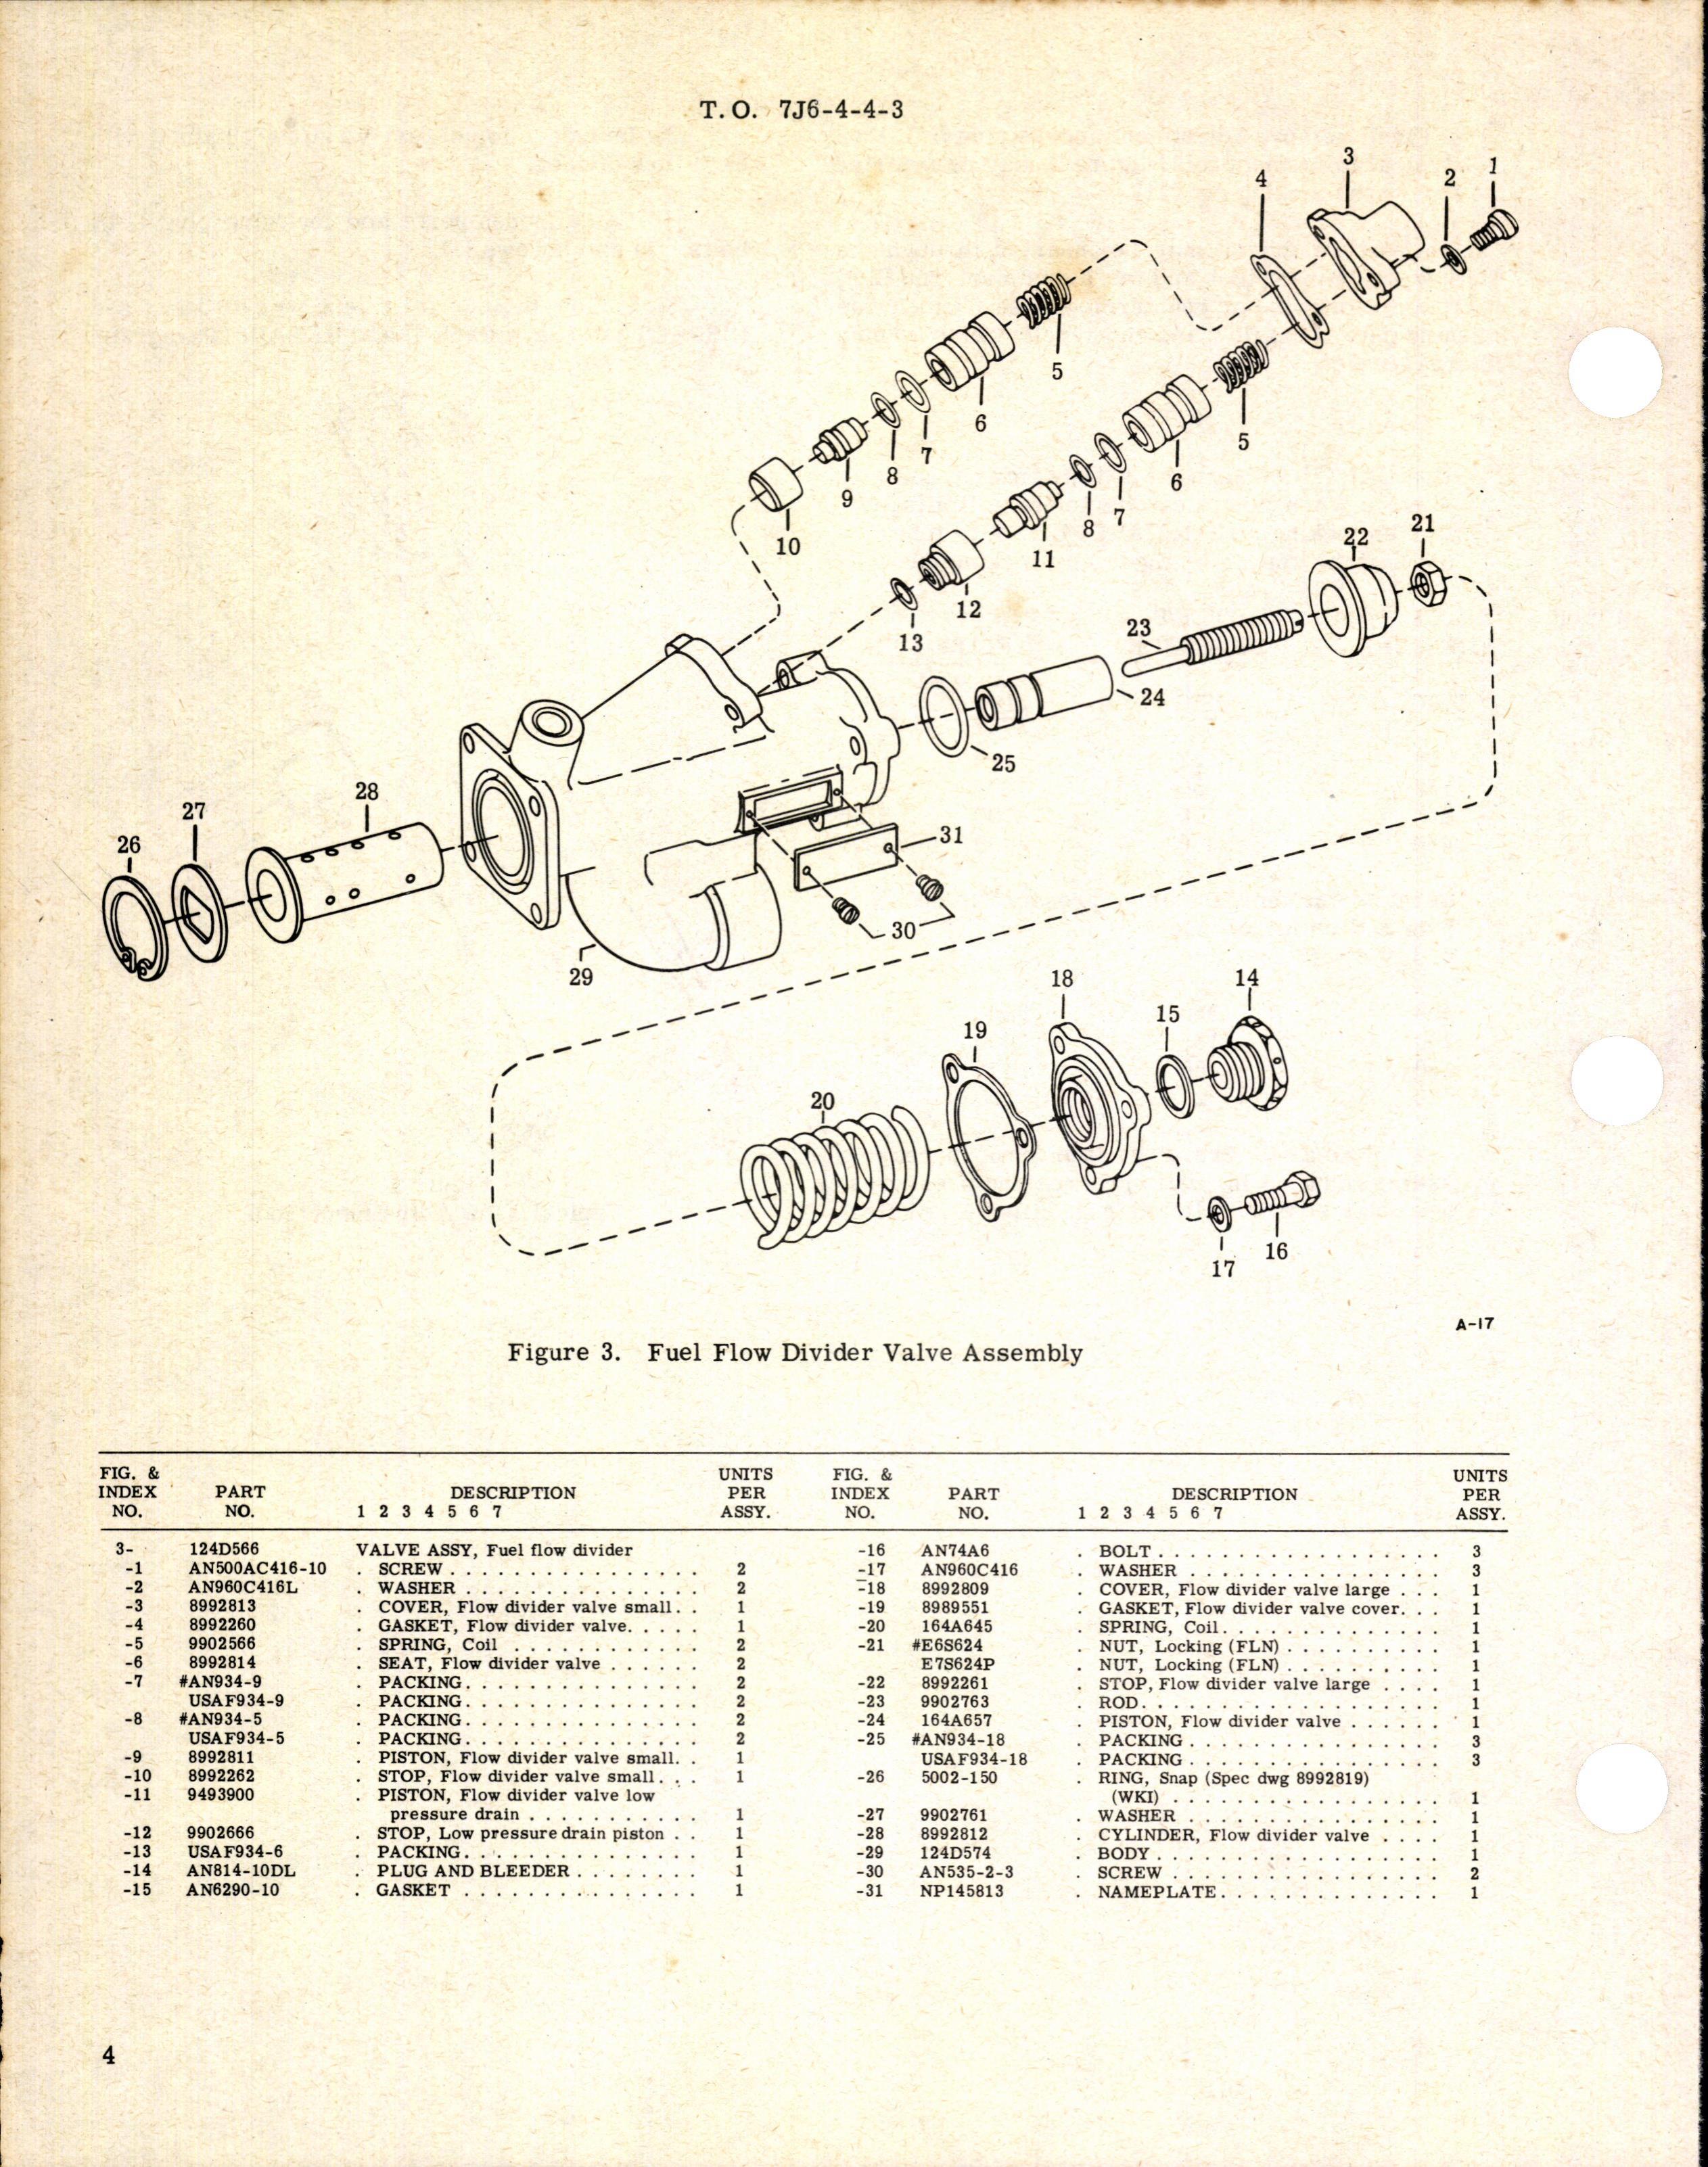 Sample page 4 from AirCorps Library document: Fuel Flow Divider Valve Assembly